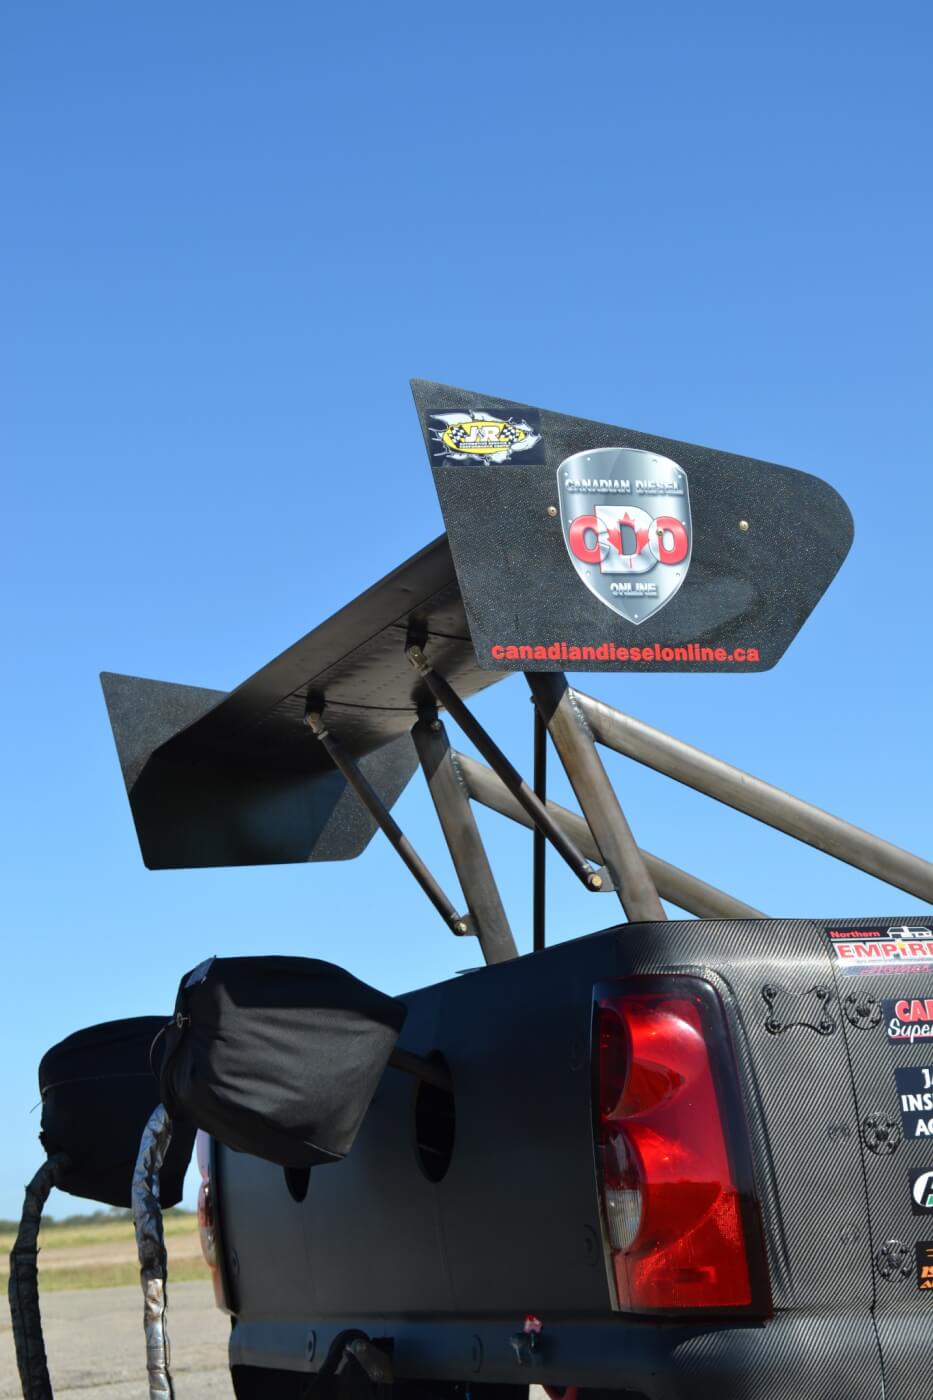 The team is aiming high when it comes to performance. The rear wing is a Top Fuel-style unit that provides an awesome amount of down force at the top end of the track to keep the truck straight, while the dual parachutes are an NHRA requirement in case the truck tops 200 mph in the quarter-mile, which is a very real possibility.